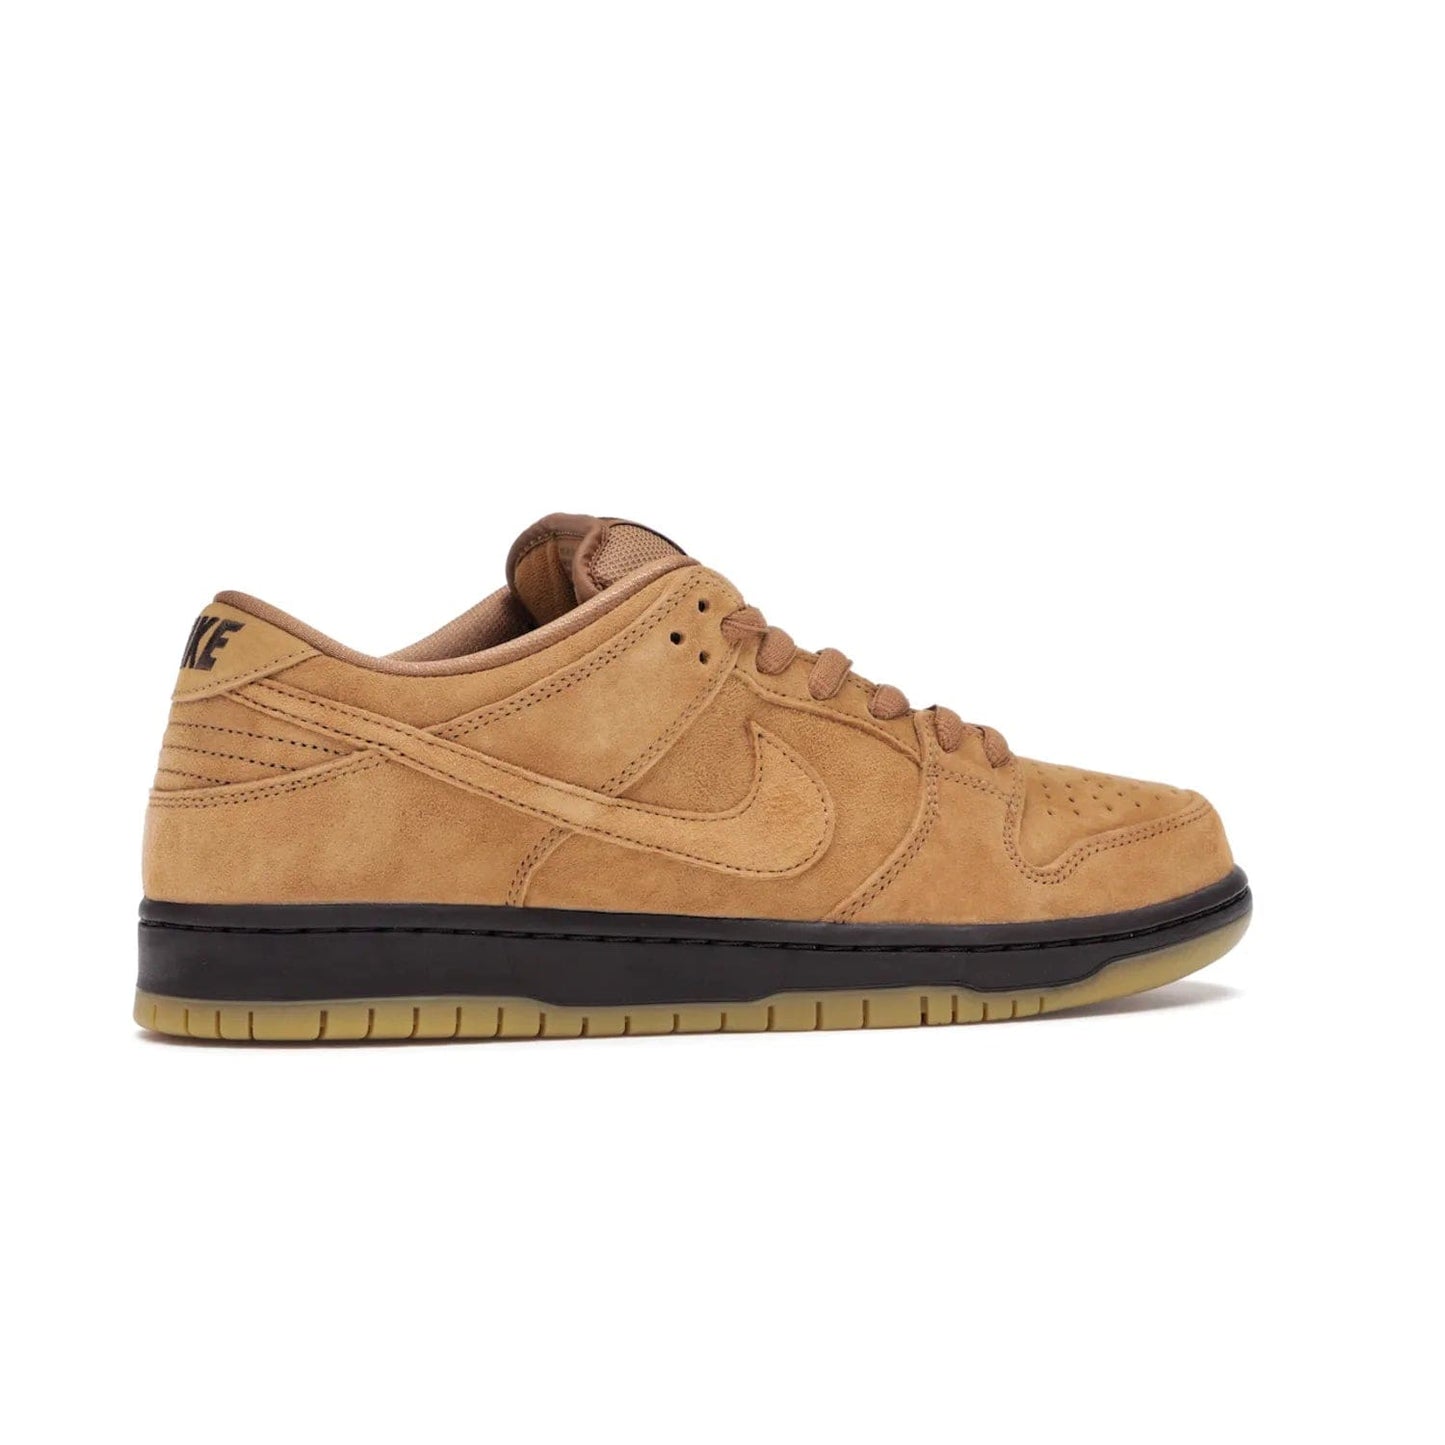 Nike SB Dunk Low Wheat (2021/2023) - Image 35 - Only at www.BallersClubKickz.com - The Nike SB Dunk Low Wheat (2021/2023)has a sleek silhouette and wheat suede upper. Tan tones for lining, mesh tongues, and laces. Iconic color palette midsole, perforated boxing toe. Brown branding on tongue and heel. Gum rubber outsole with partitioned pattern for traction. Eschewed in Feb 2021 for $110.